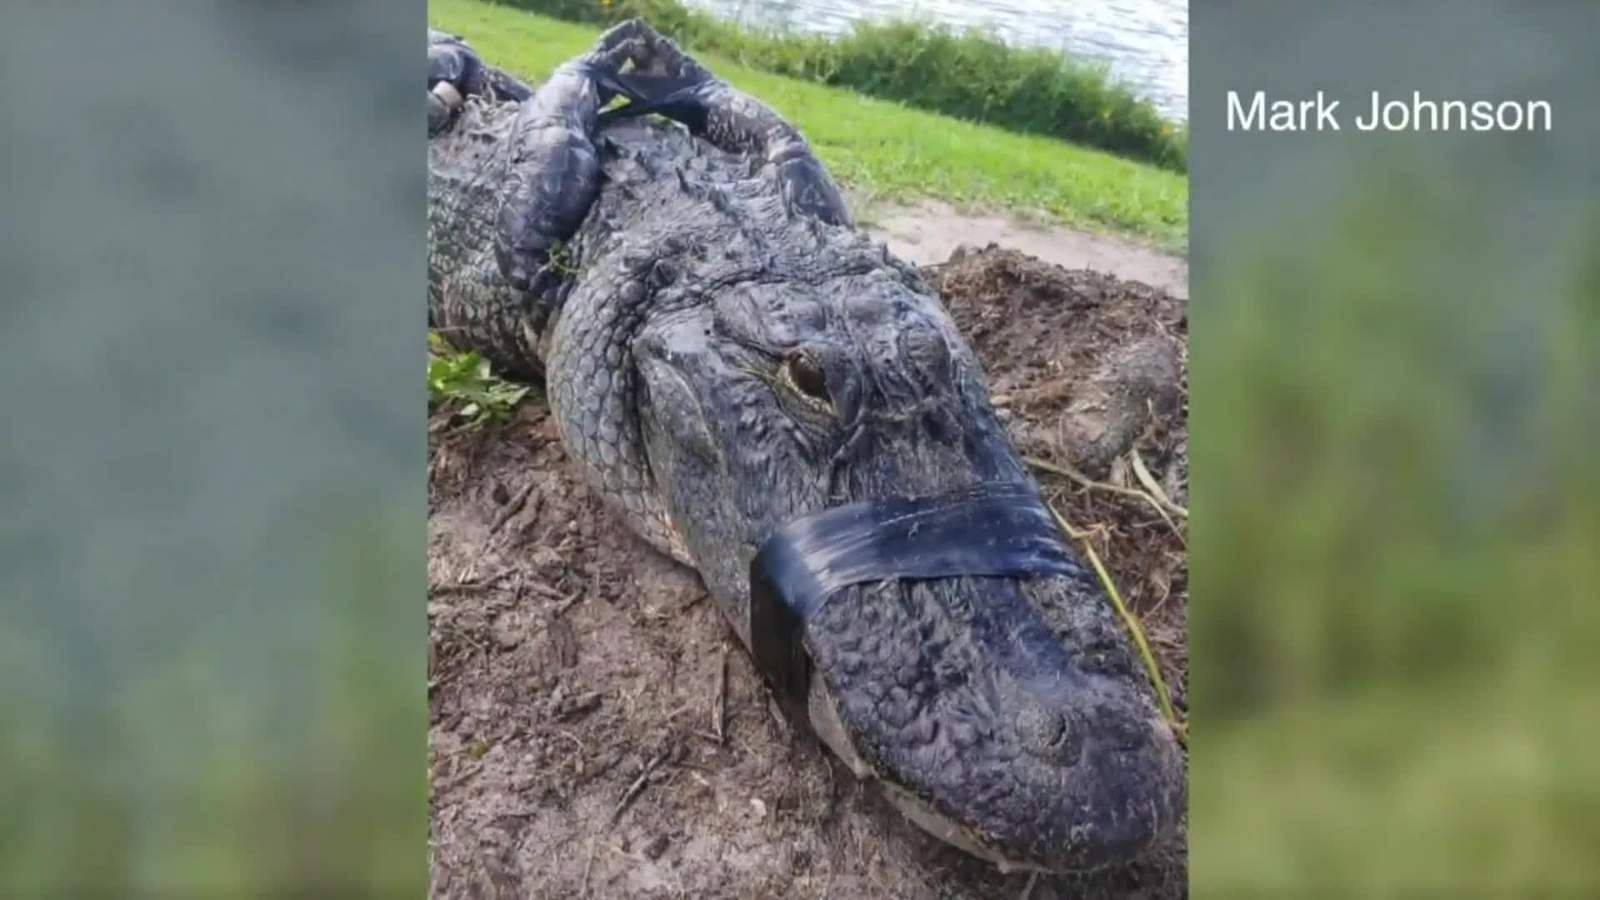 This simple move likely saved Florida man's life after gator bite